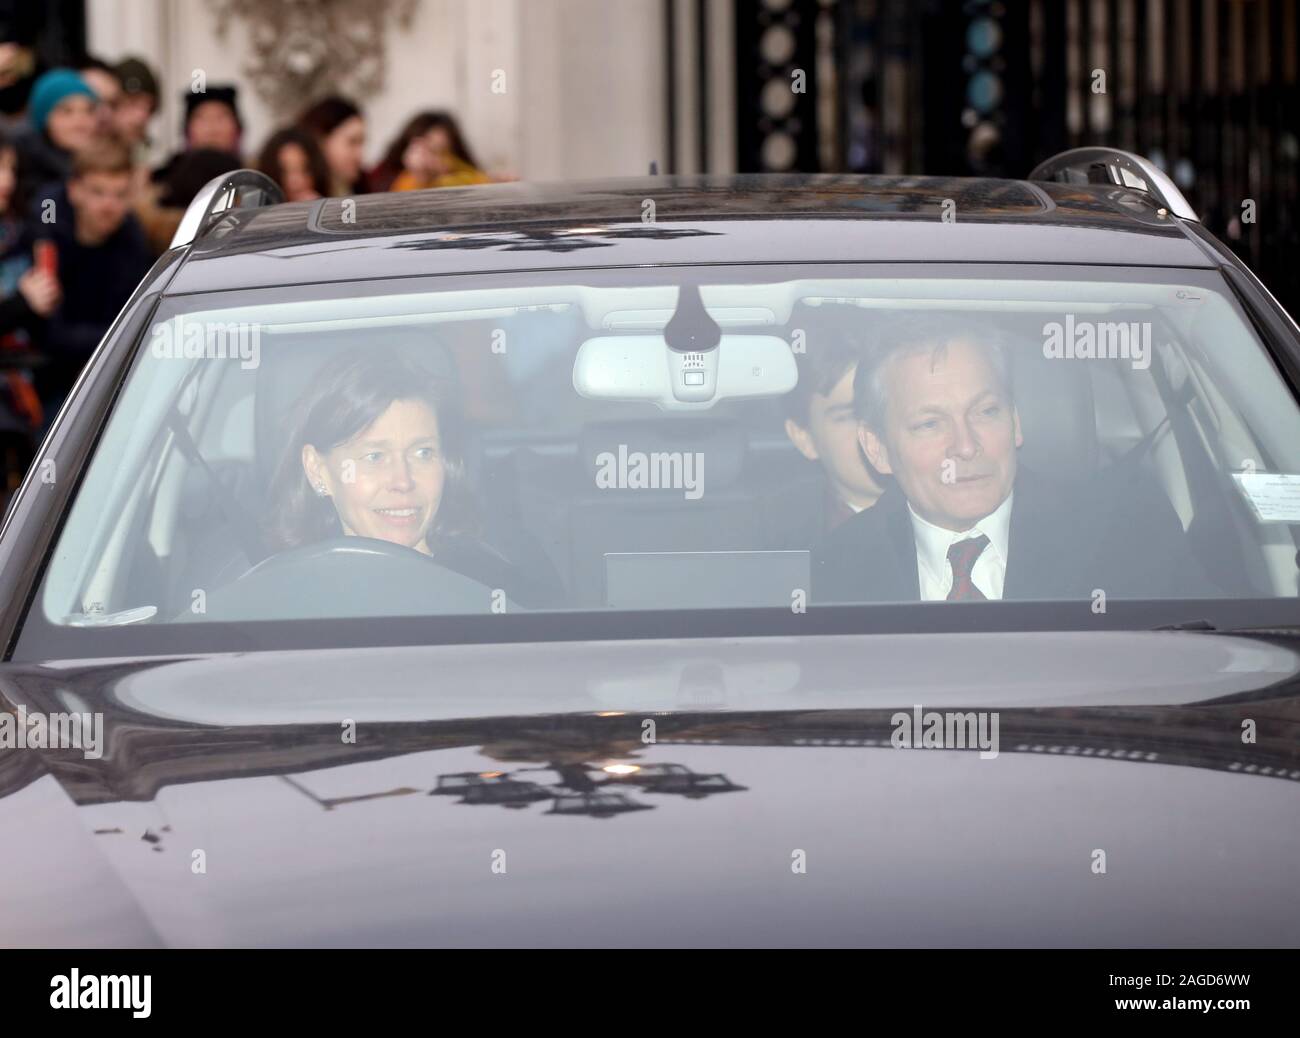 London, UK. 18th Dec, 2019. Lady Sarah Chatto and Daniel Chatto were amongst the guests as members of the Royal family attend HM Queen Elizabeth II's annual Christmas lunch, at Buckingham Palace, London, on December 18, 2019. Credit: Paul Marriott/Alamy Live News Stock Photo